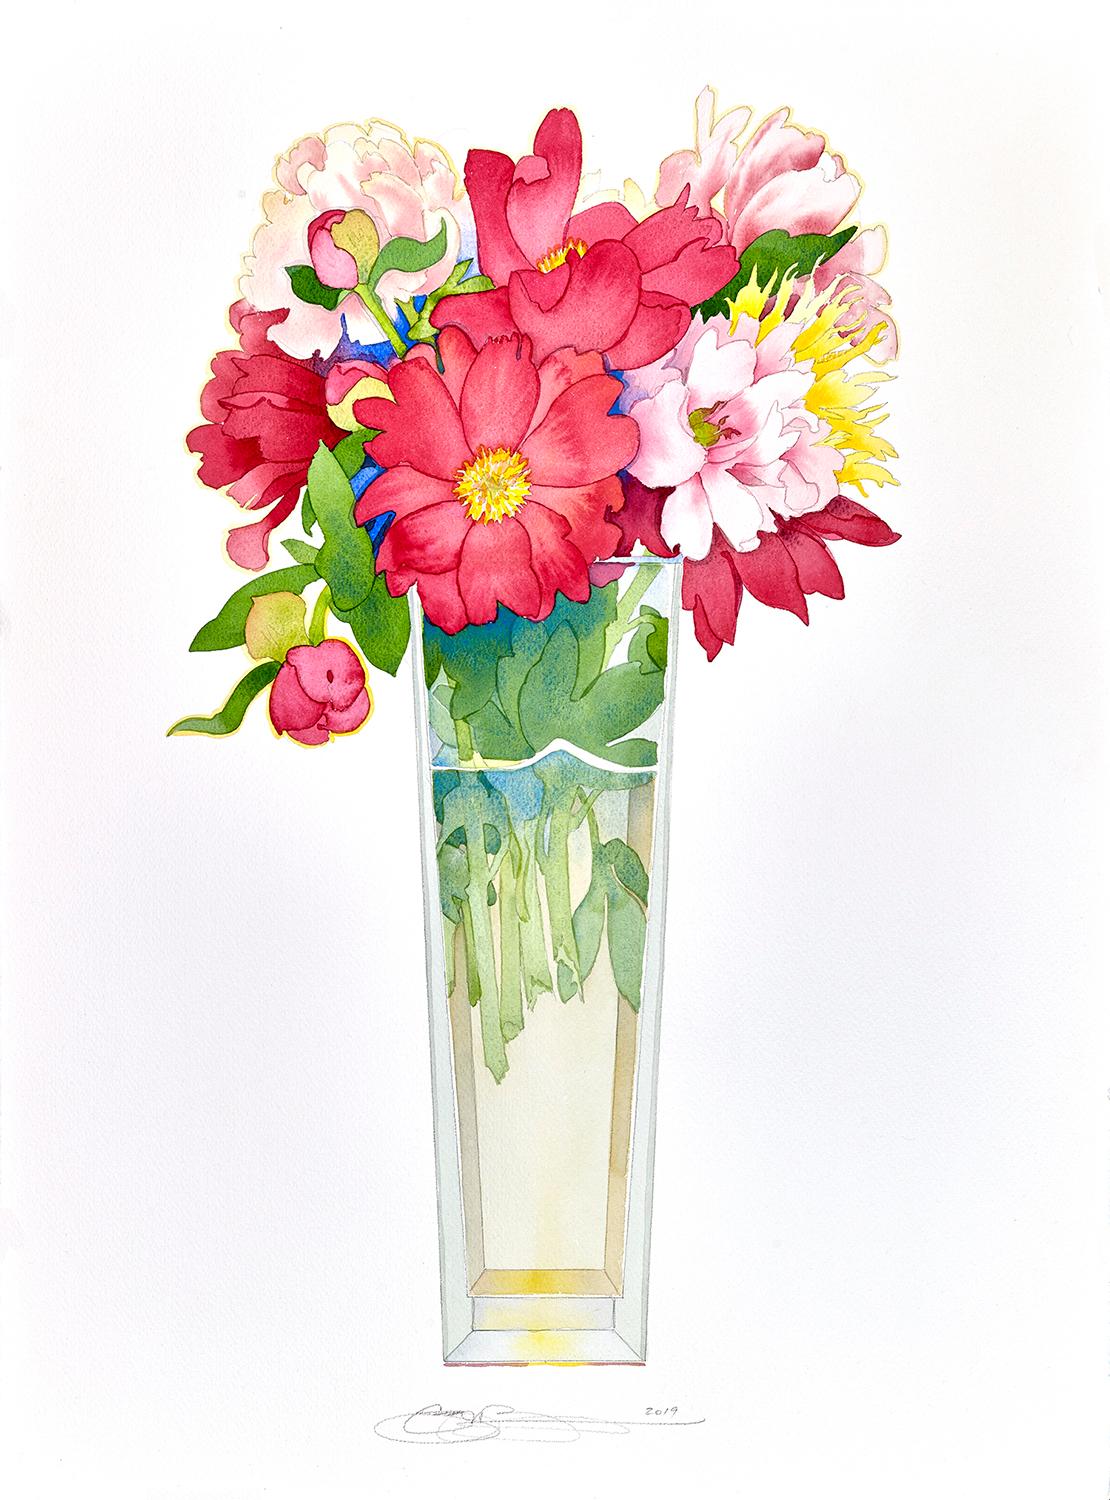 This watercolor by Gary Bukovnik features an arrangement of peonies flowers in a clear vase.  The flowers are red and pink with splashes of yellow and green to complete the composition.  This work is framed in a hand made lacquered wood frame with